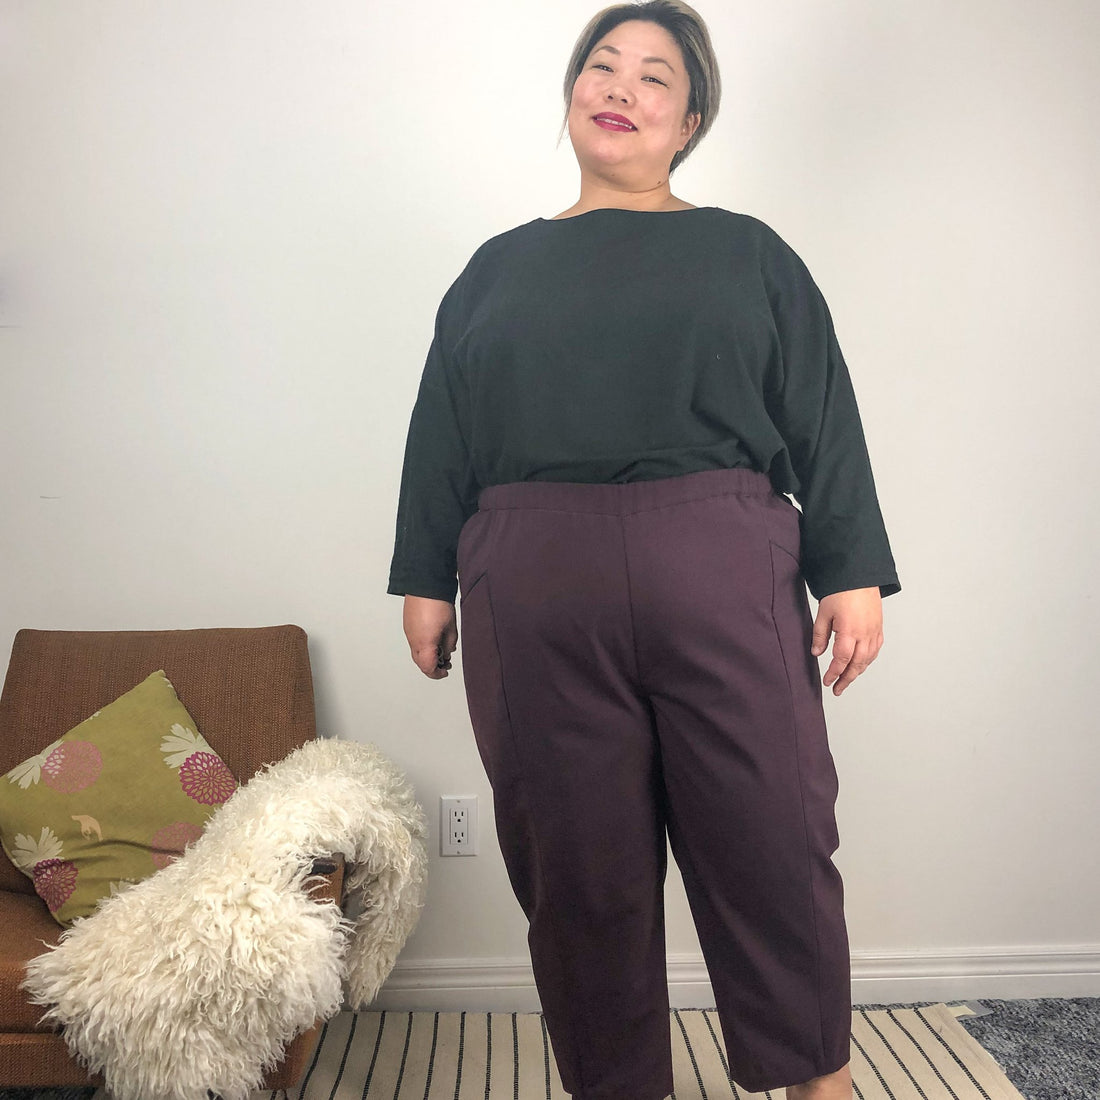 What size Sculthorpe Pants should you make?